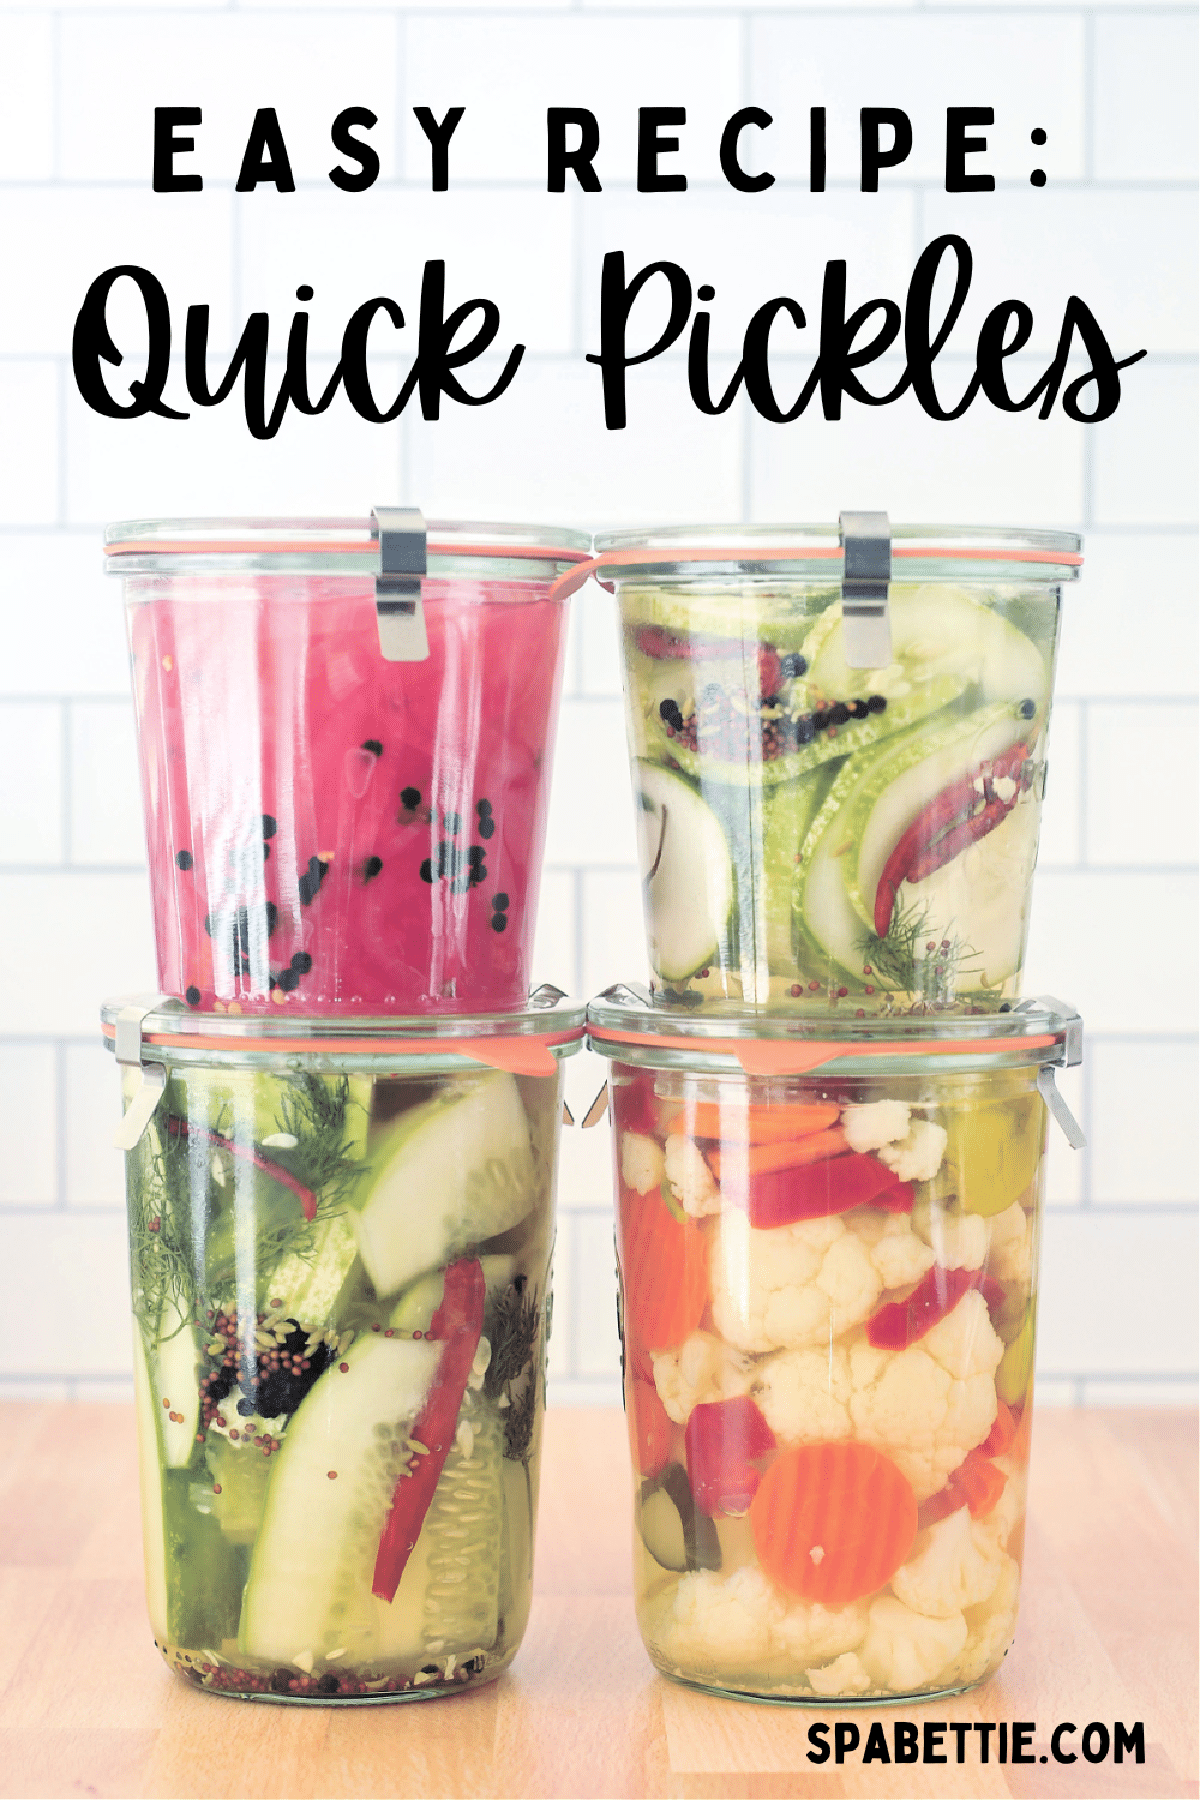 Four glass jars stacked two high, filled with quick pickles: a small jar of bright pink pickled onions sits on a larger jar of quick pickles, and a smaller jar of quick pickles sits on a larger jar of pickled carrot, cauliflower, and peppers.